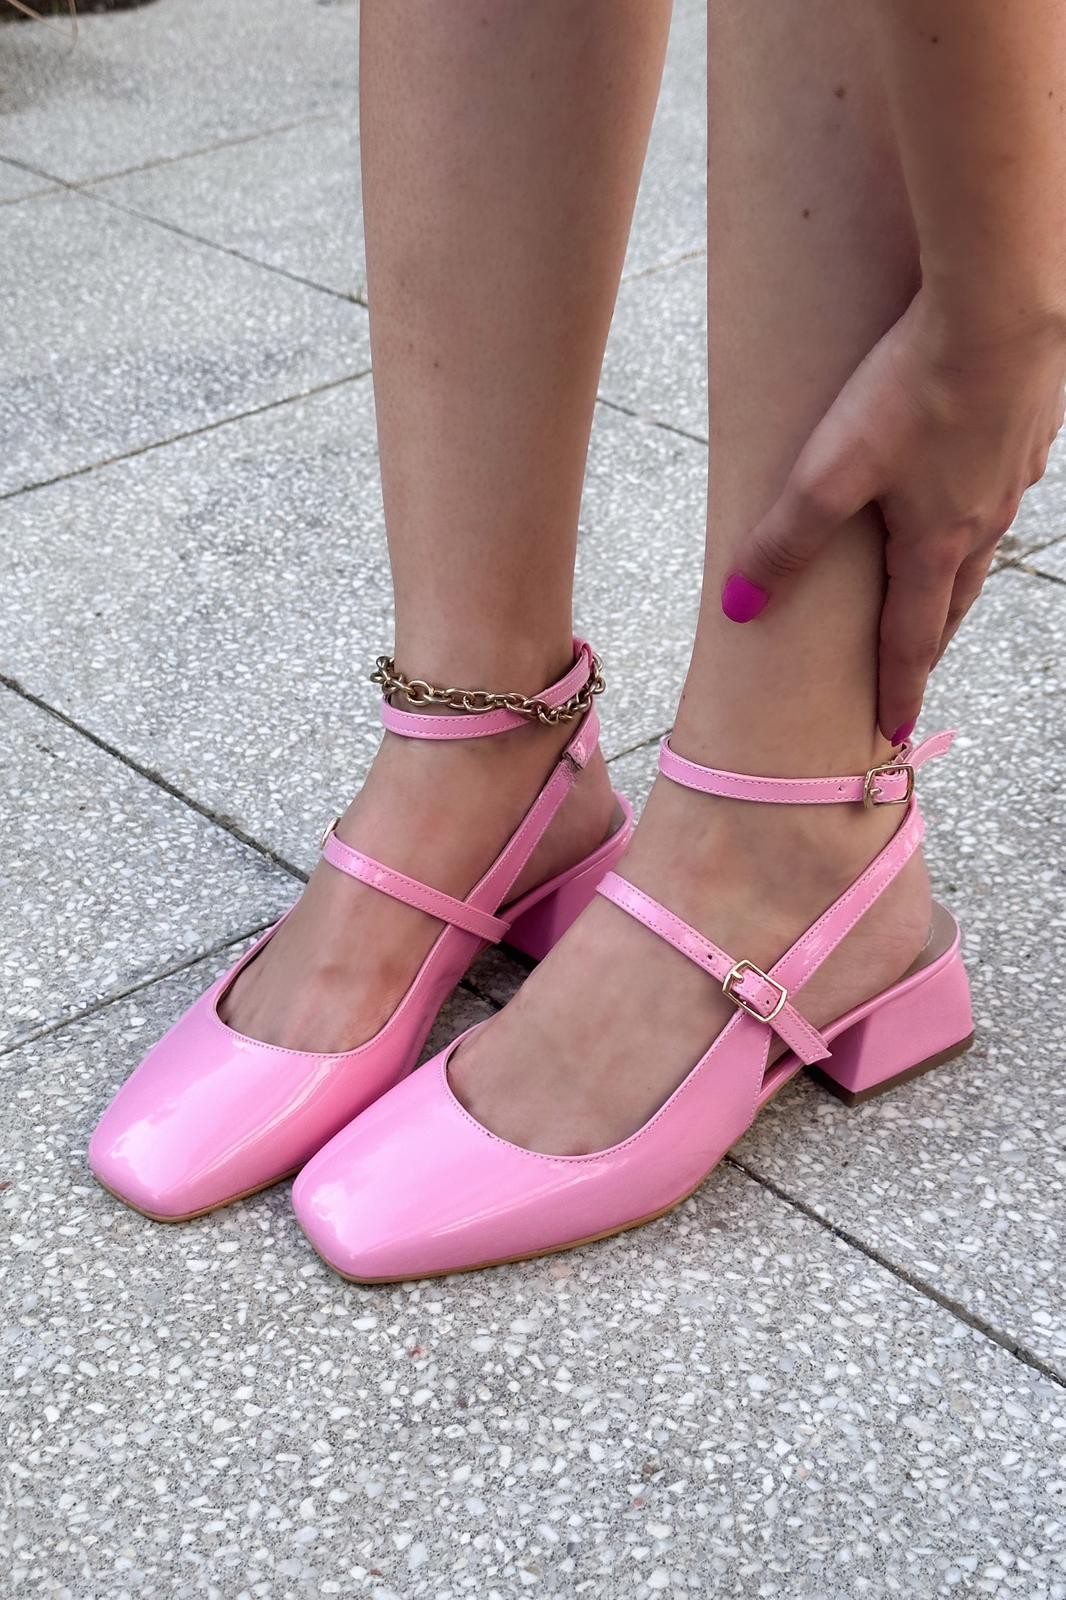 Notins Patent Leather Mary Jane Women Heels Pink Pink